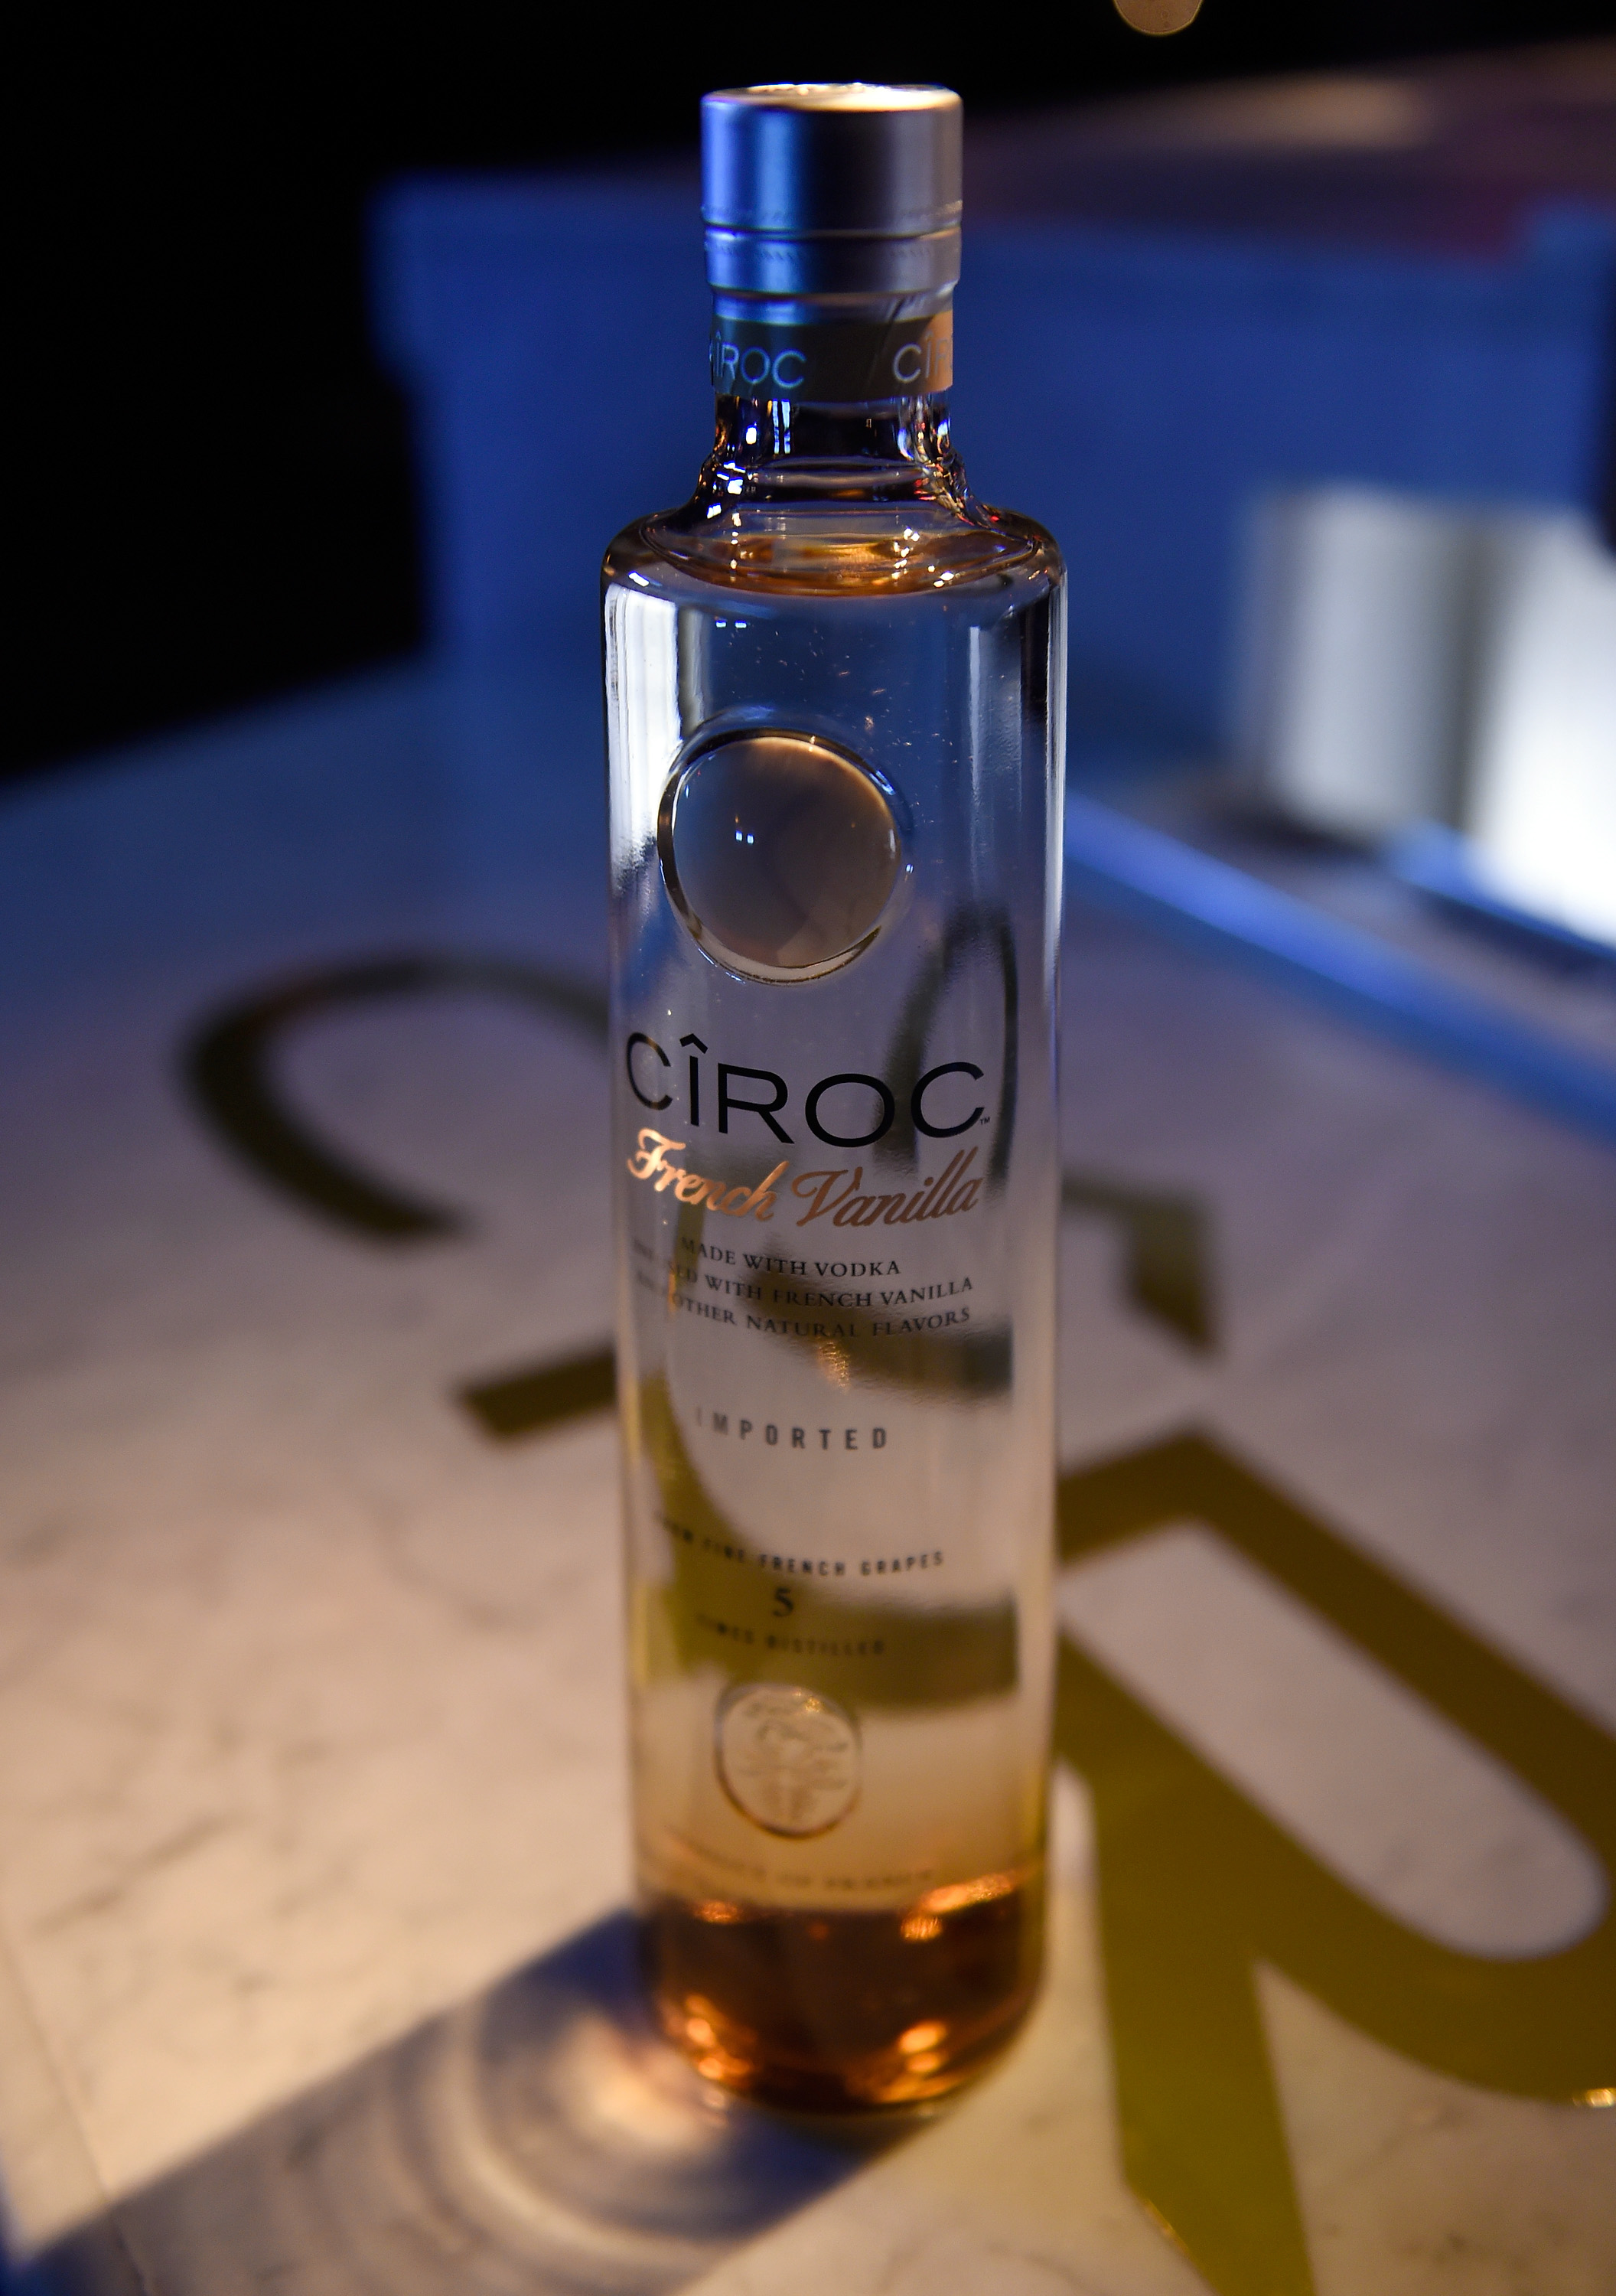 Ciroc's New Star-Studded 'Rat Pack' Ad With Jessica White, Eva Marcille & More